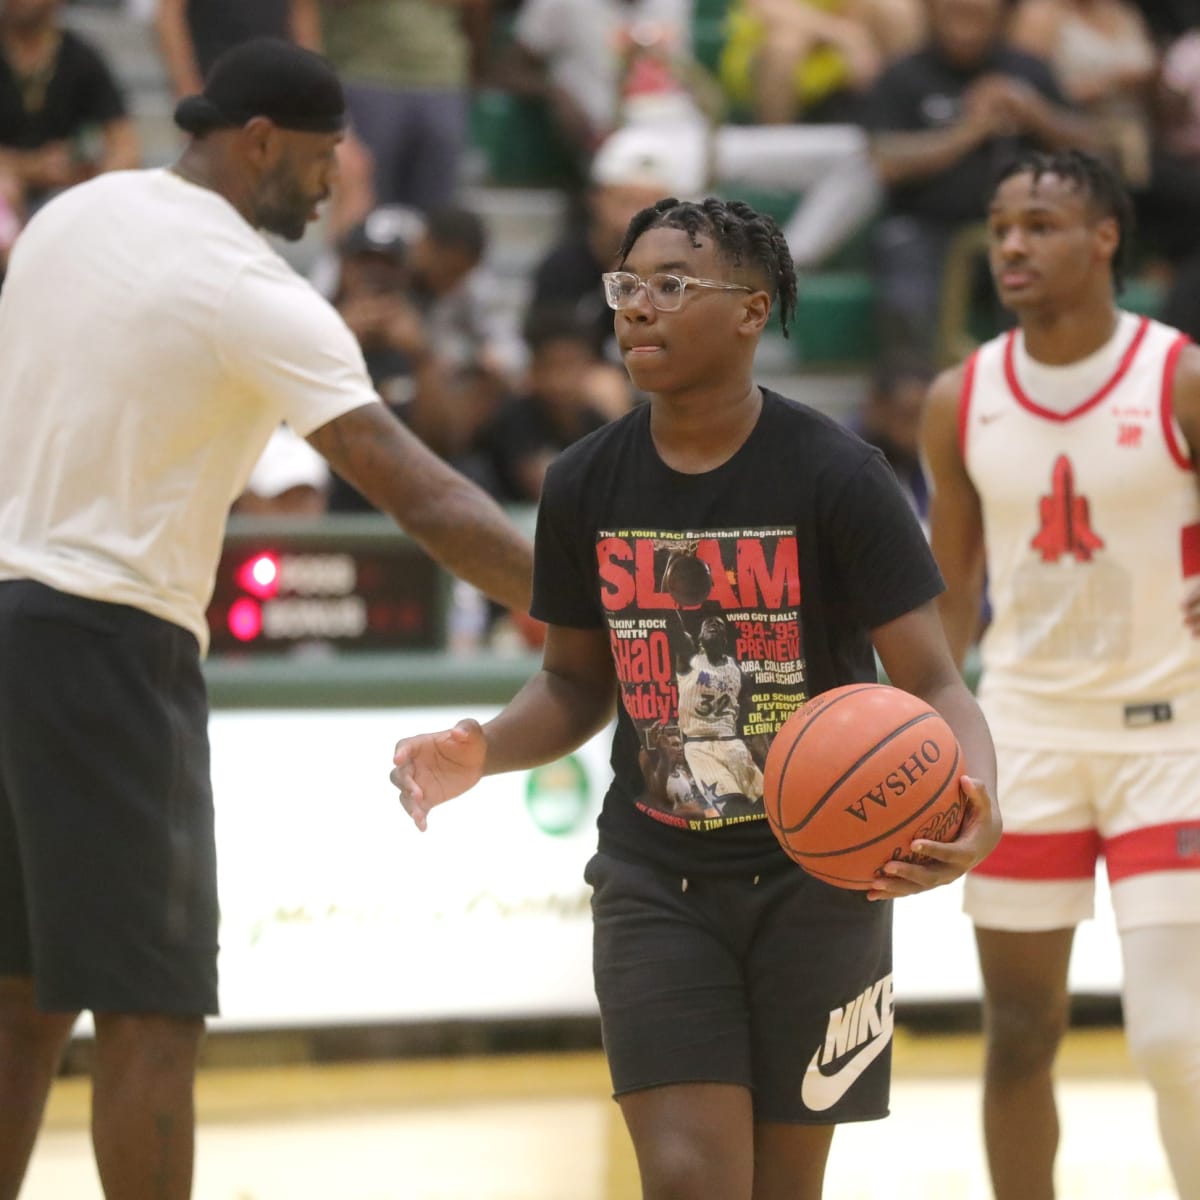 Bryce has 4 inches on Bronny!: LeBron James' Sons Leave NBA Twitter  Debating About Their Height After ESPY Appearance - The SportsRush